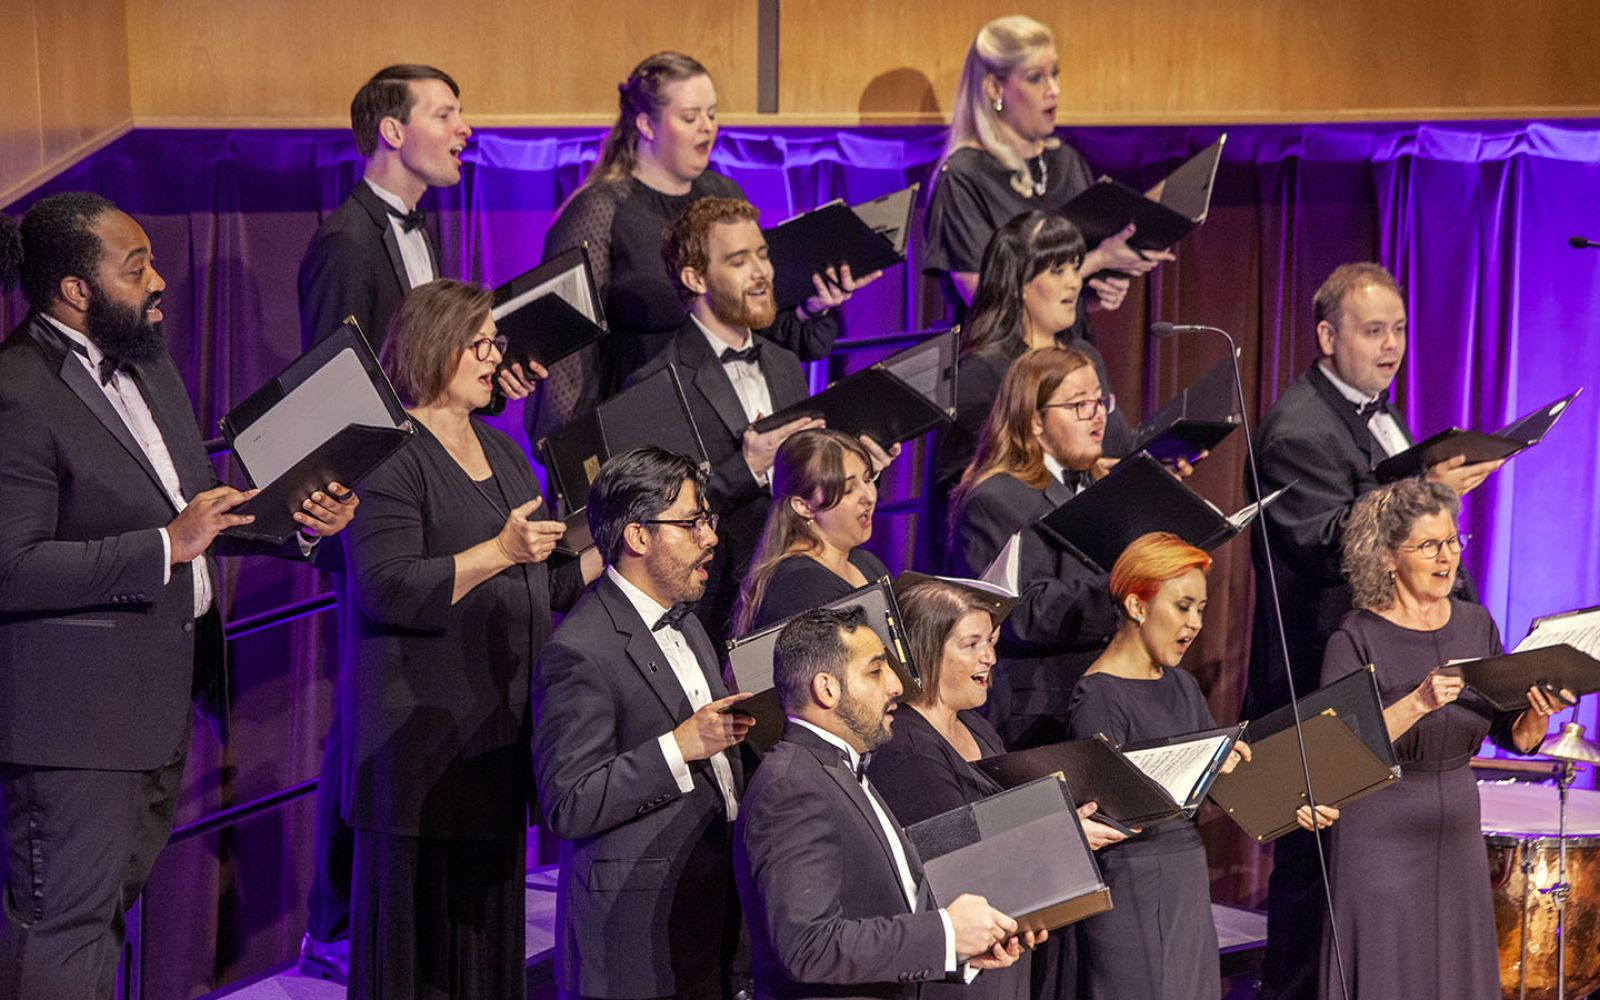 Heartland Sings will host A Night at the Opera on Wednesday, May 22, at Auer Performance Hall on the campus of Purdue University Fort Wayne.